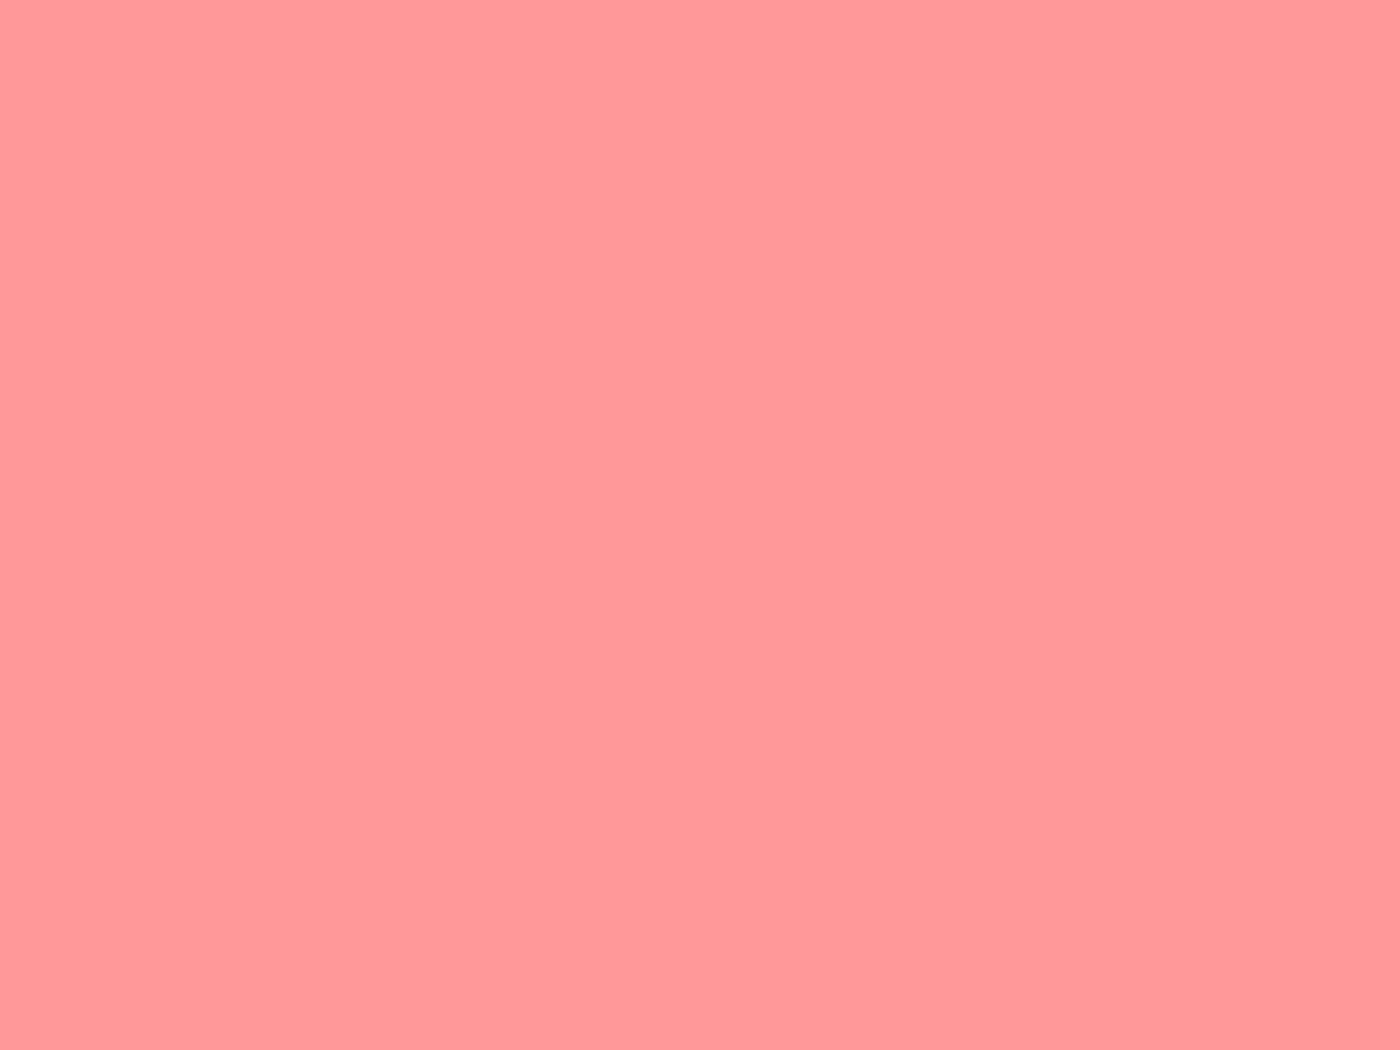 1400x1050 Light Salmon Pink Solid Color Background